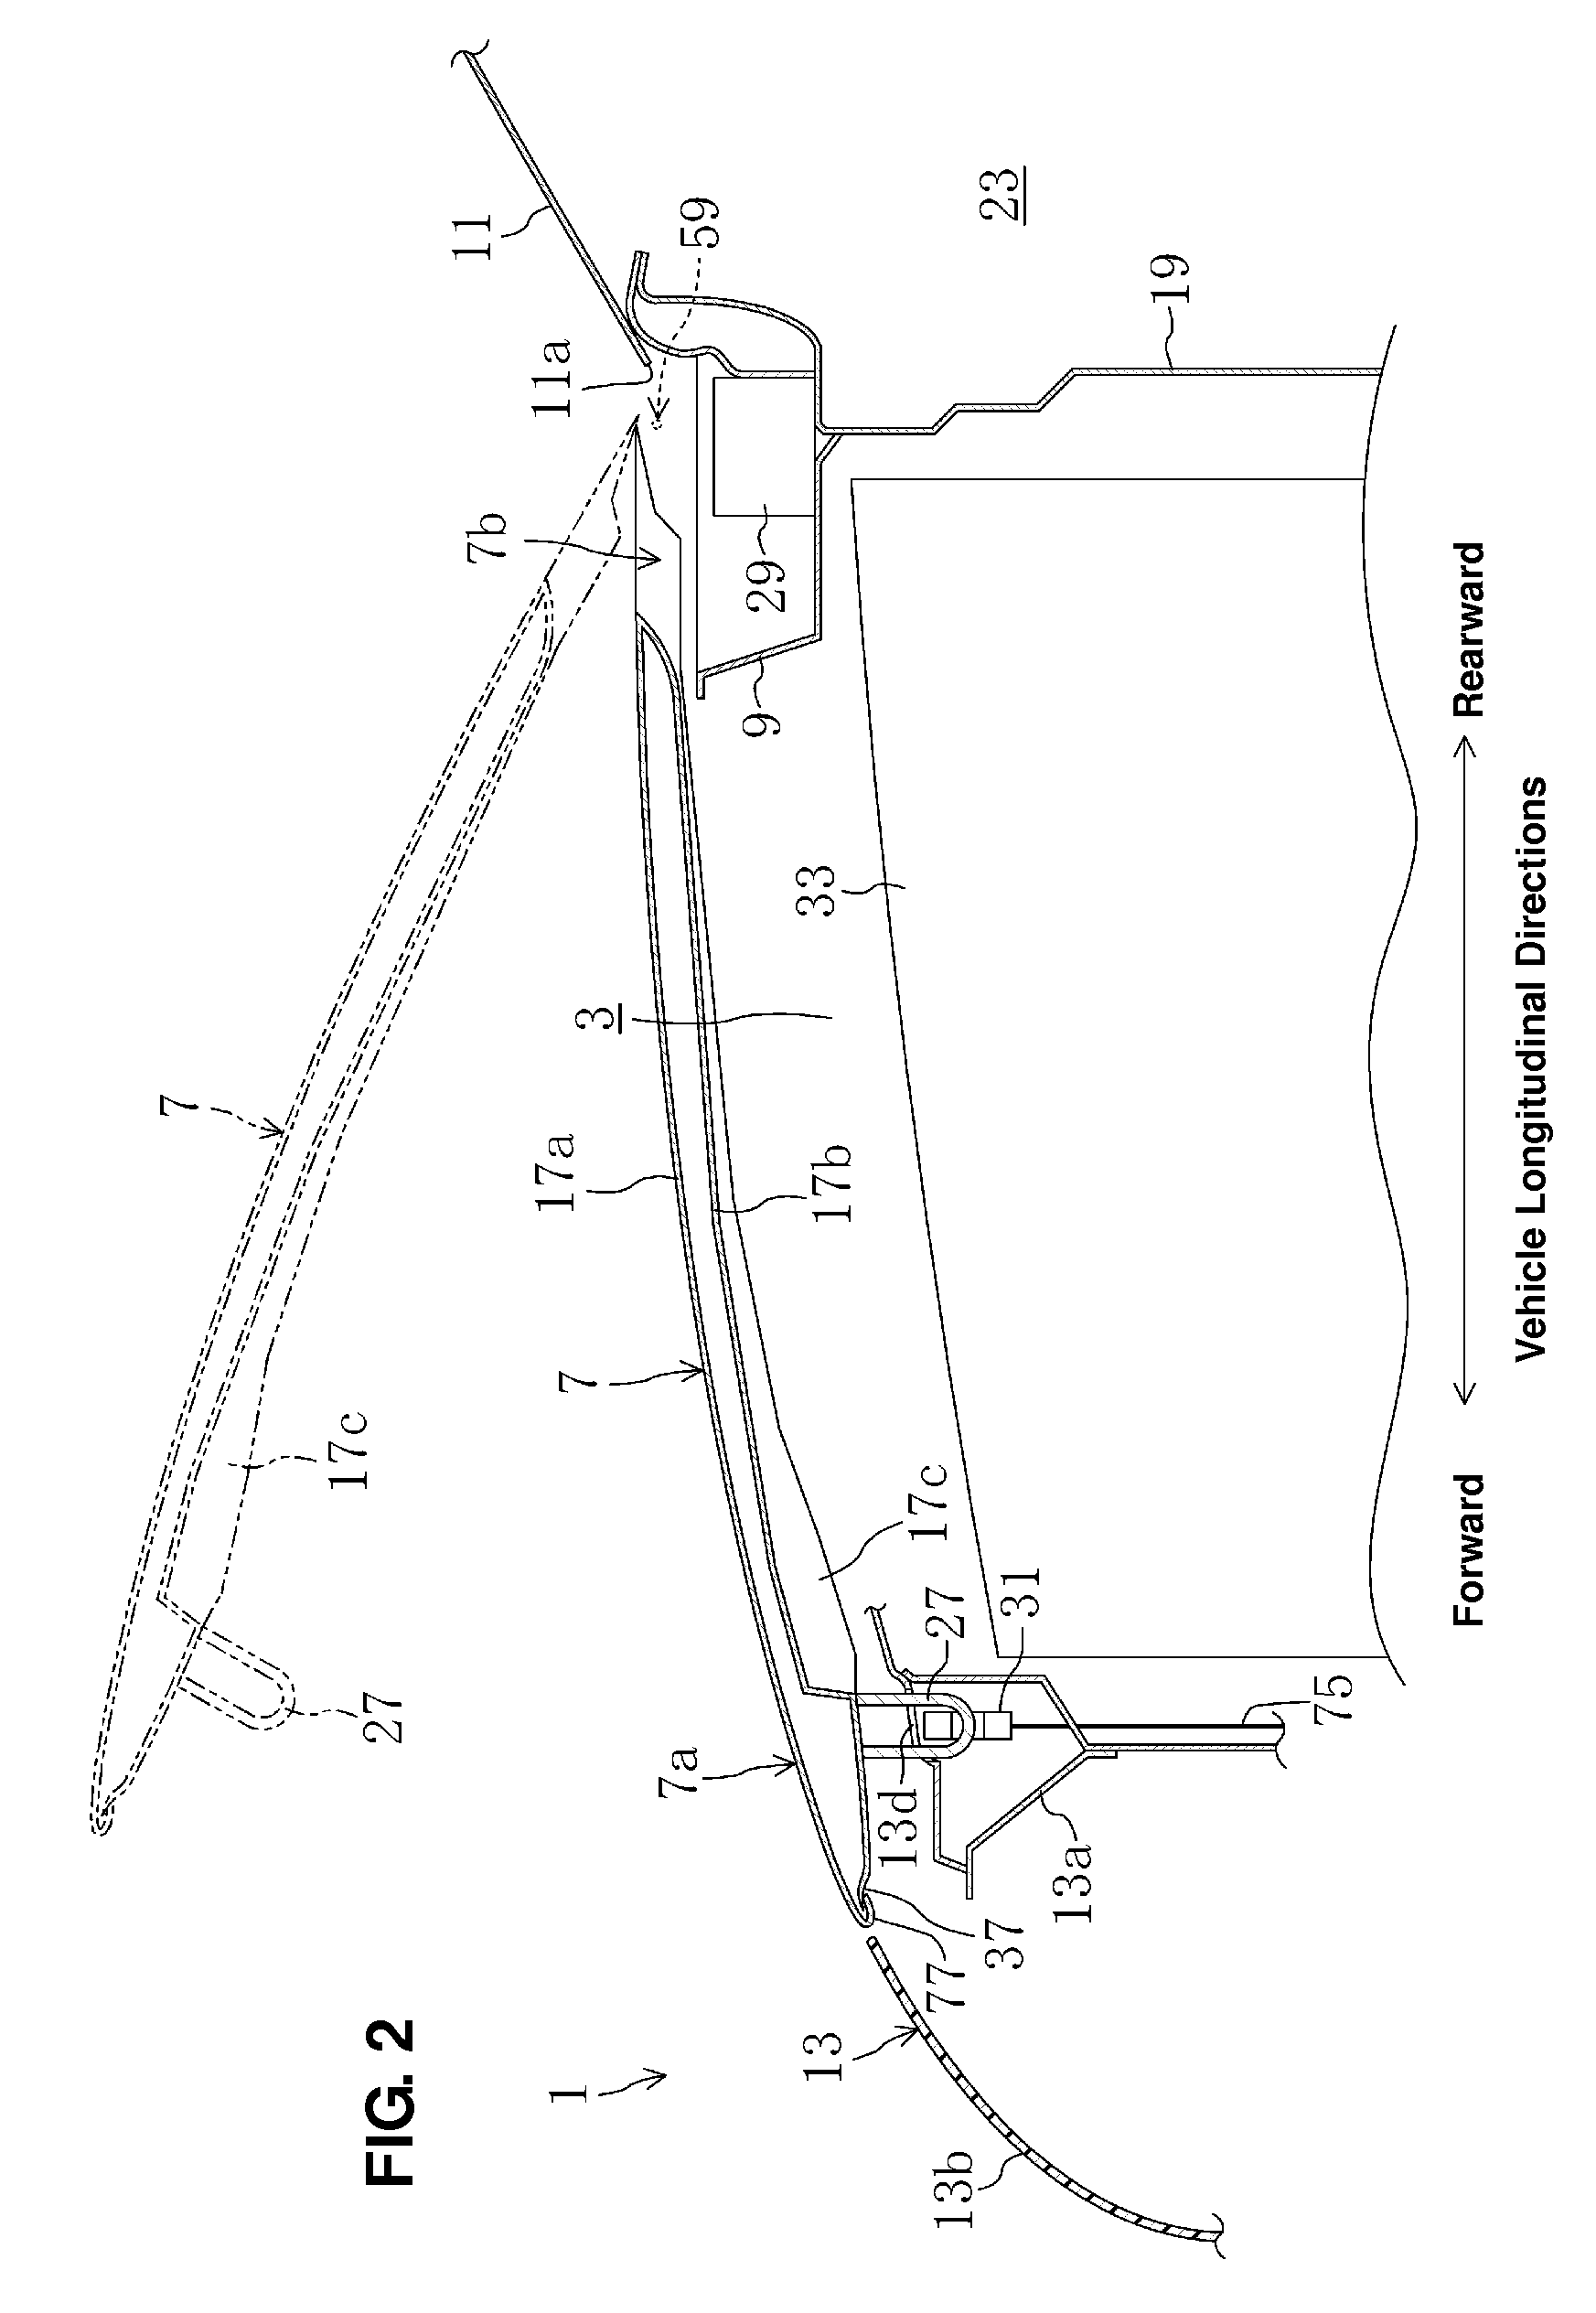 Pedestrian protection device for vehicle